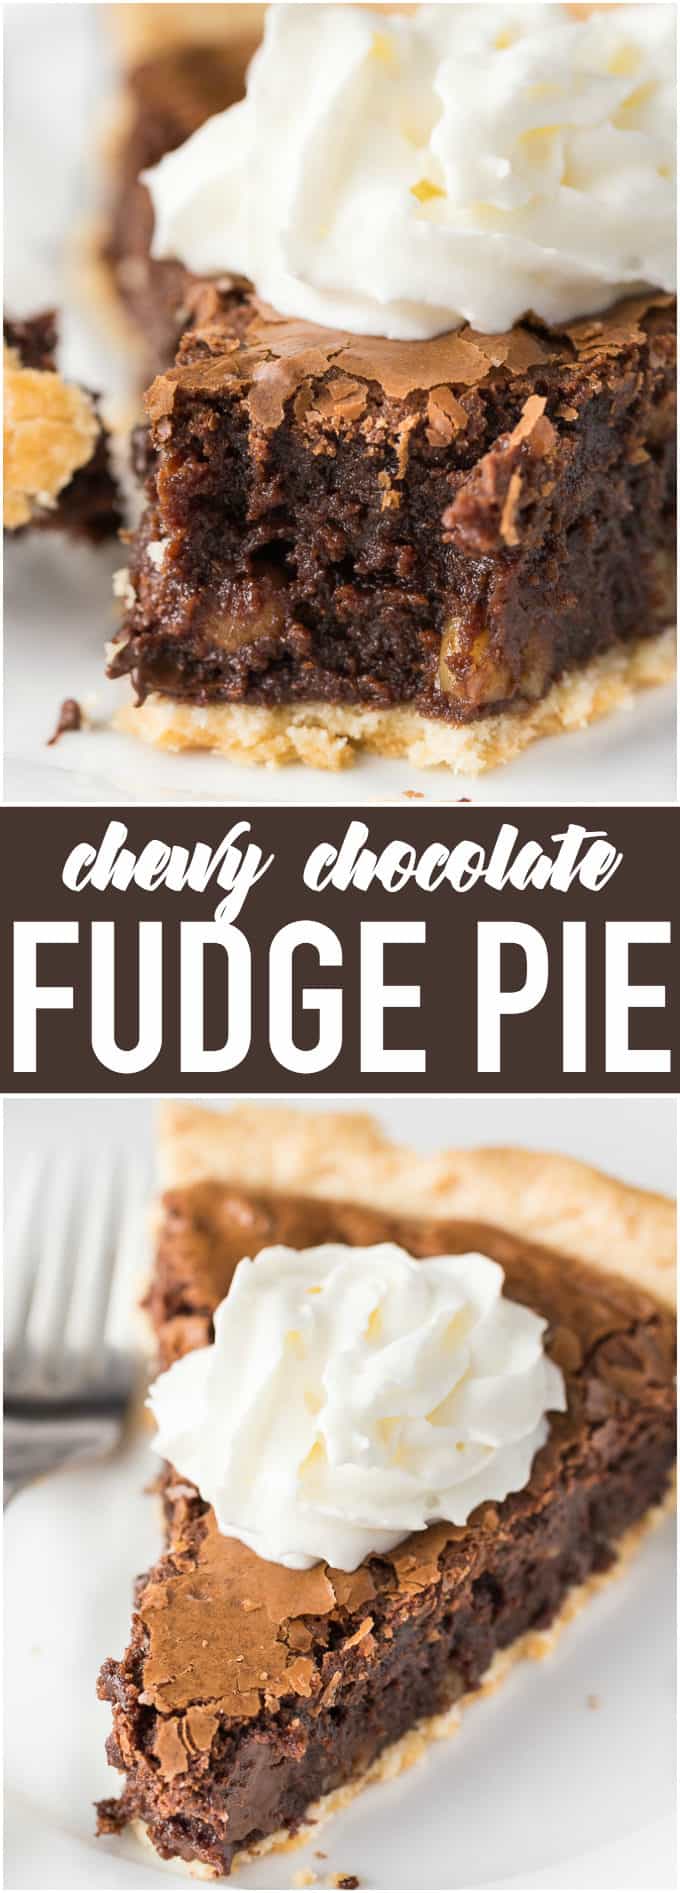 Chewy Chocolate Fudge Pie - With a fudgy brownie-like filling, this is a surefire hit with chocolate lovers! A decadent dessert - perfect for a holiday or special occasion. 